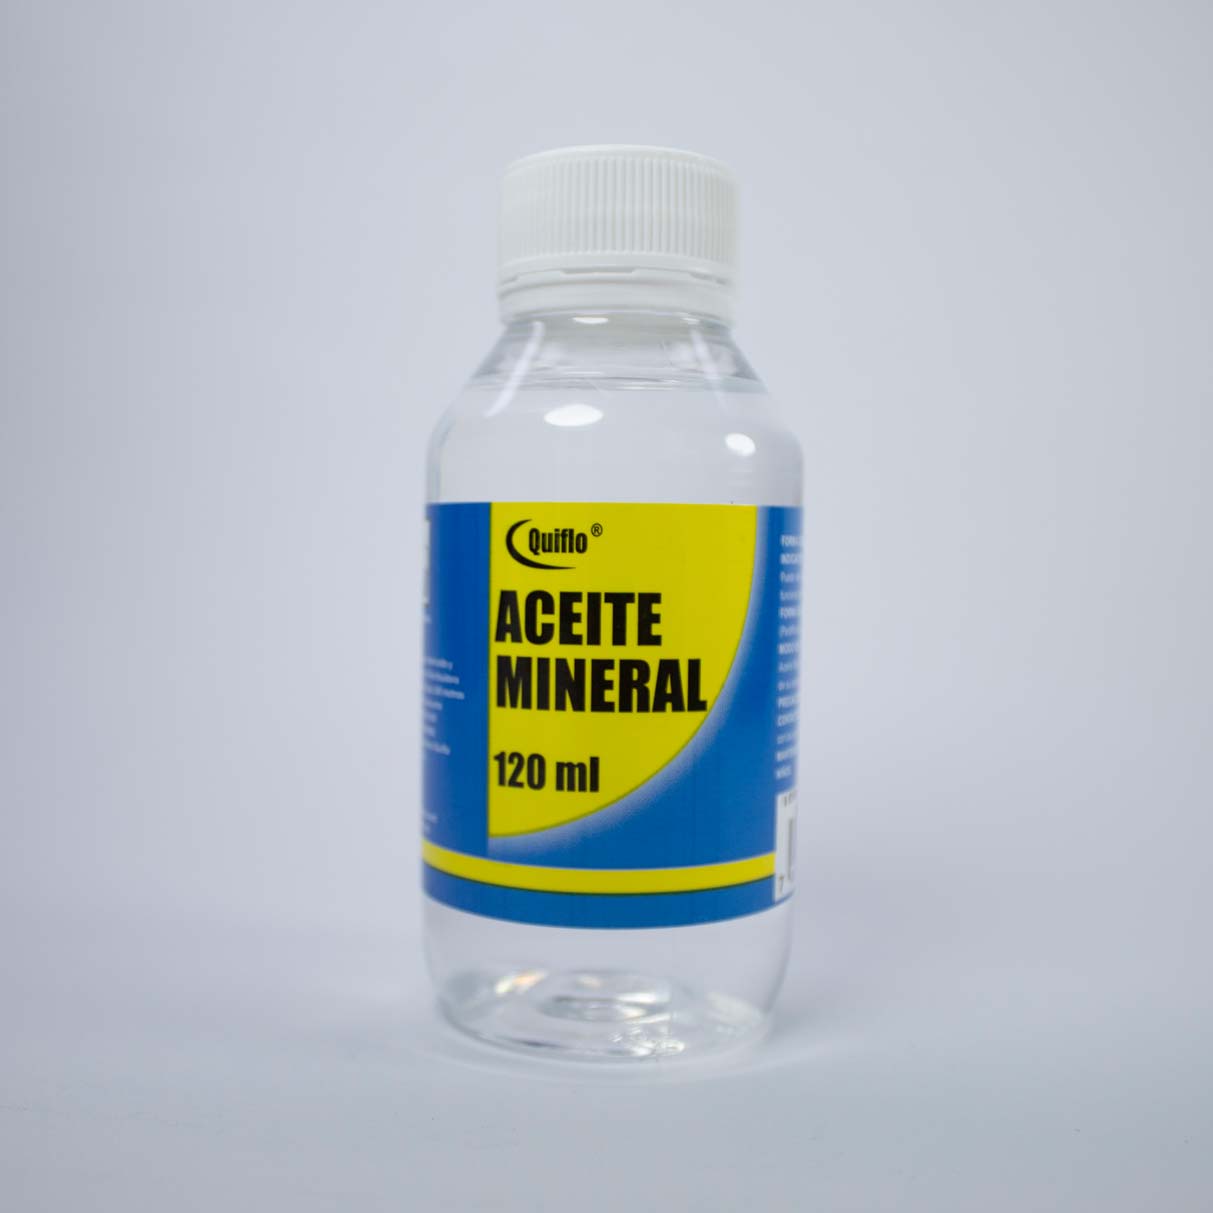 Aceite mineral chemo 240 ml